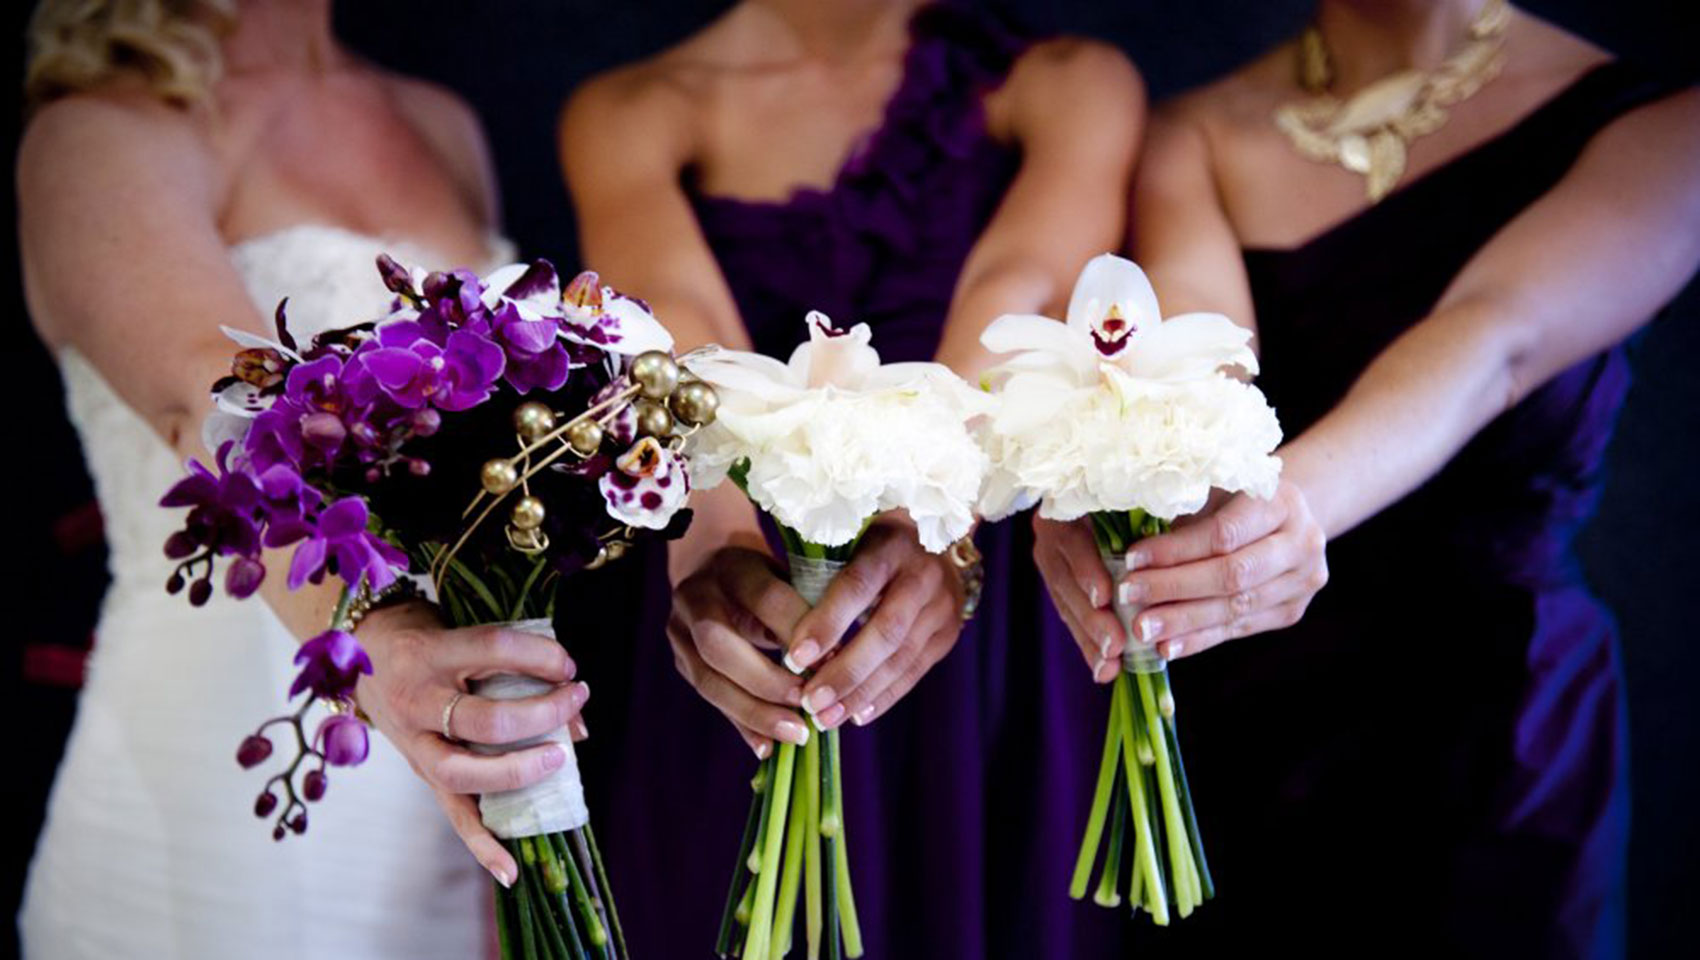 Bride and bridesmaids Holding Flowers